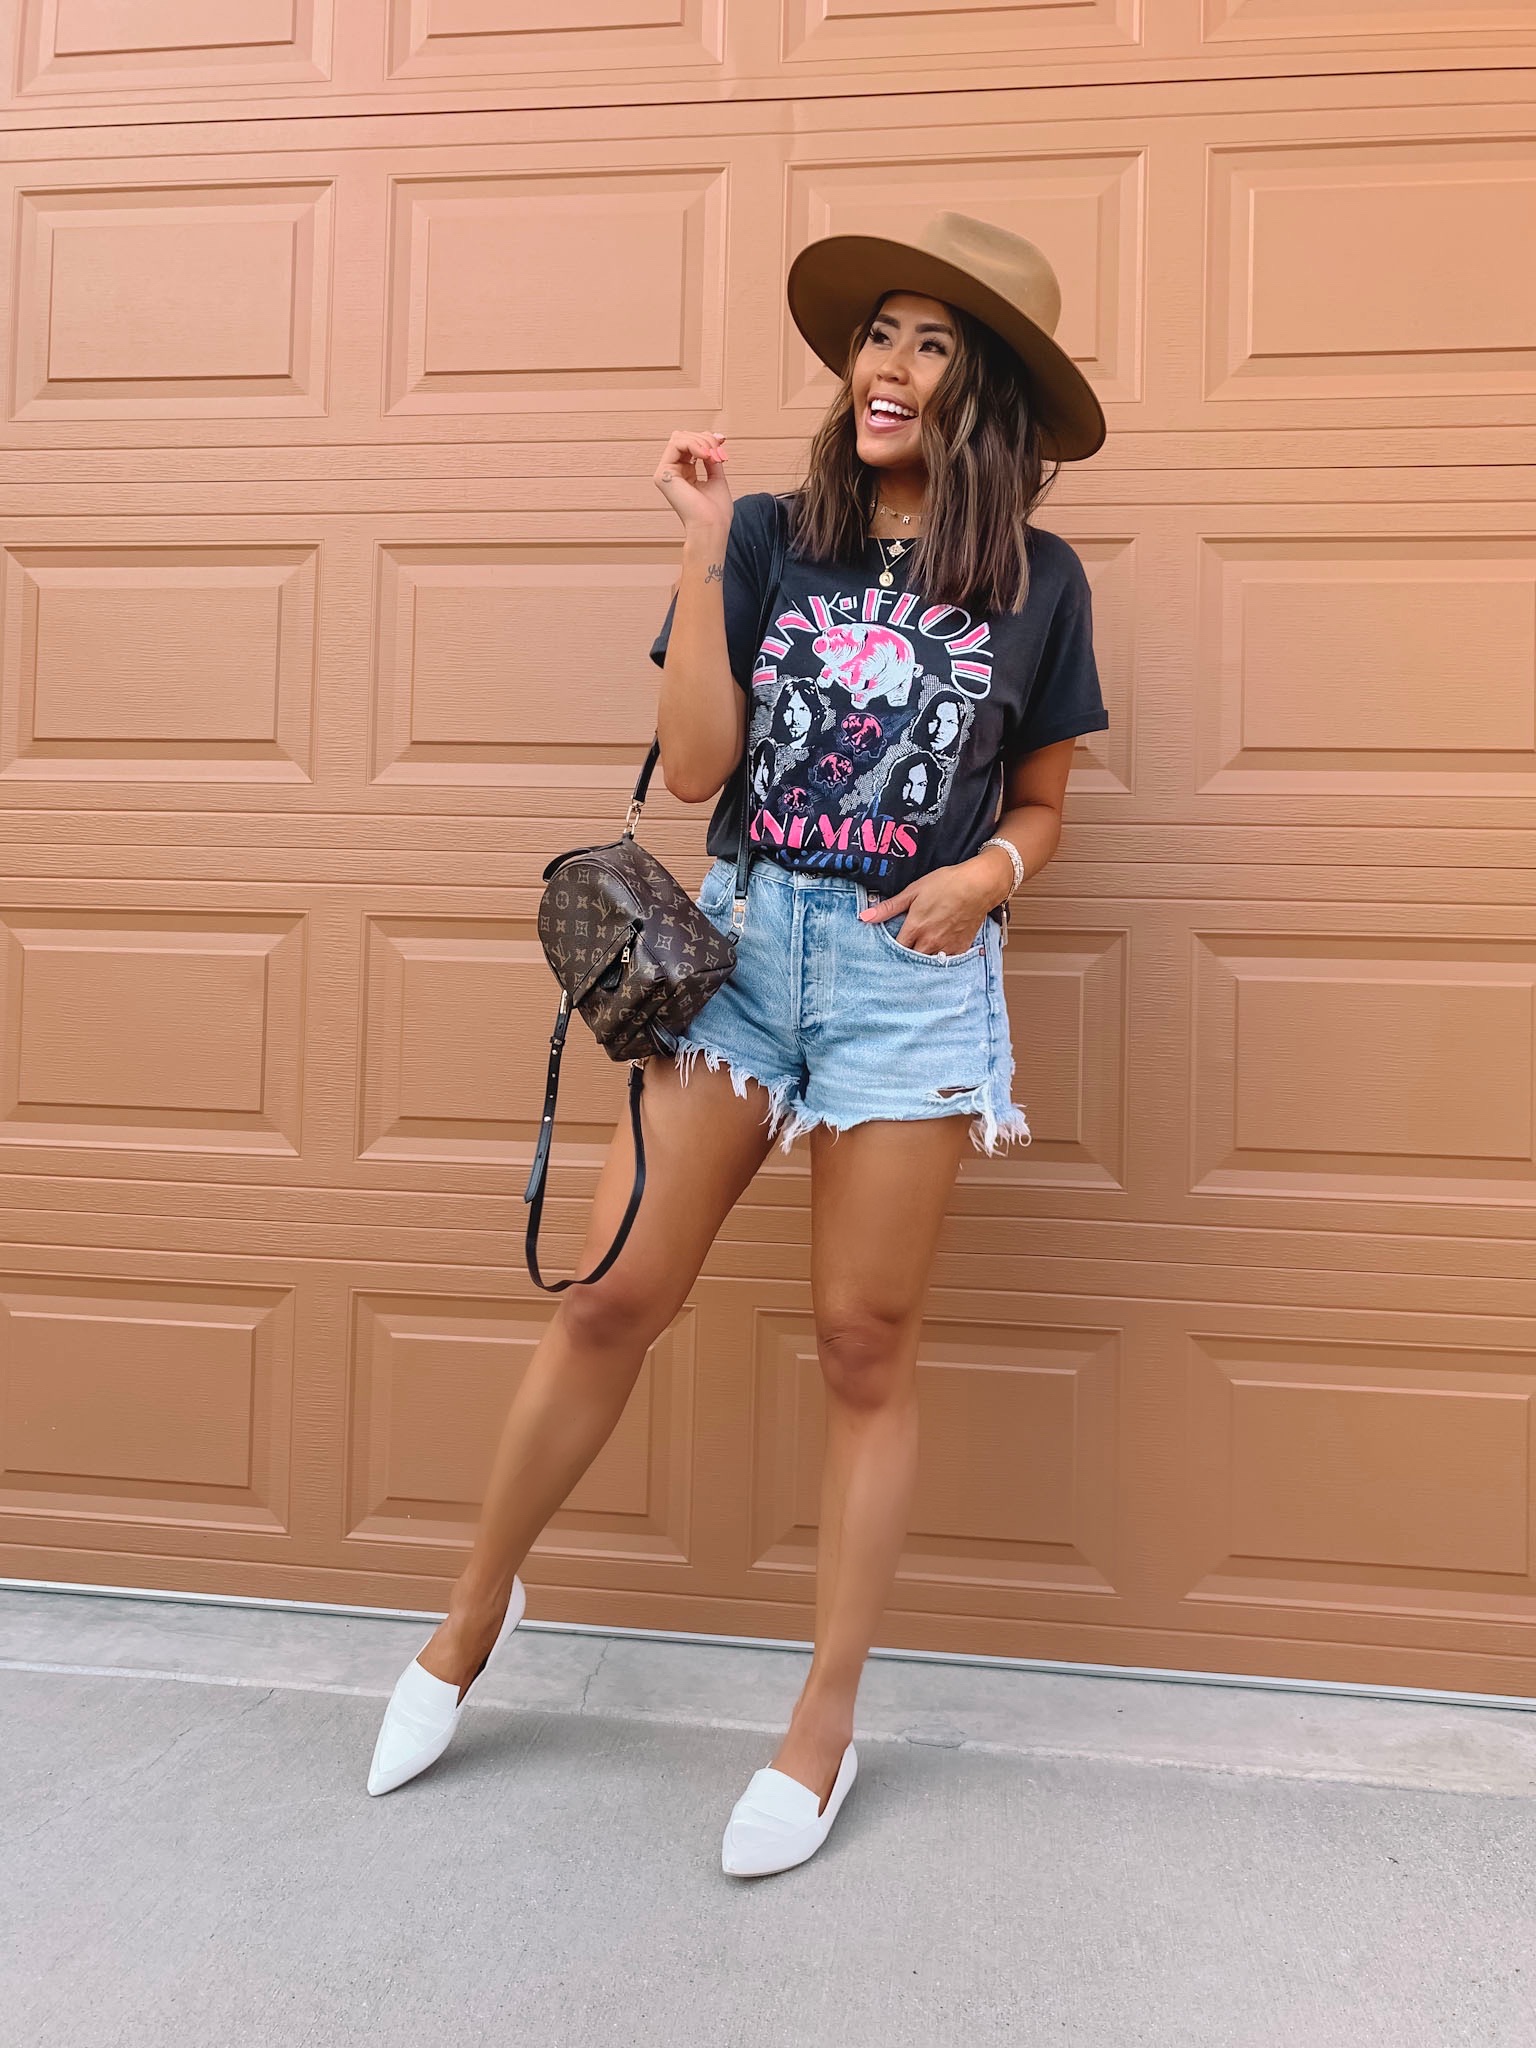 Graphic Tees - Summer Outfit Ideas